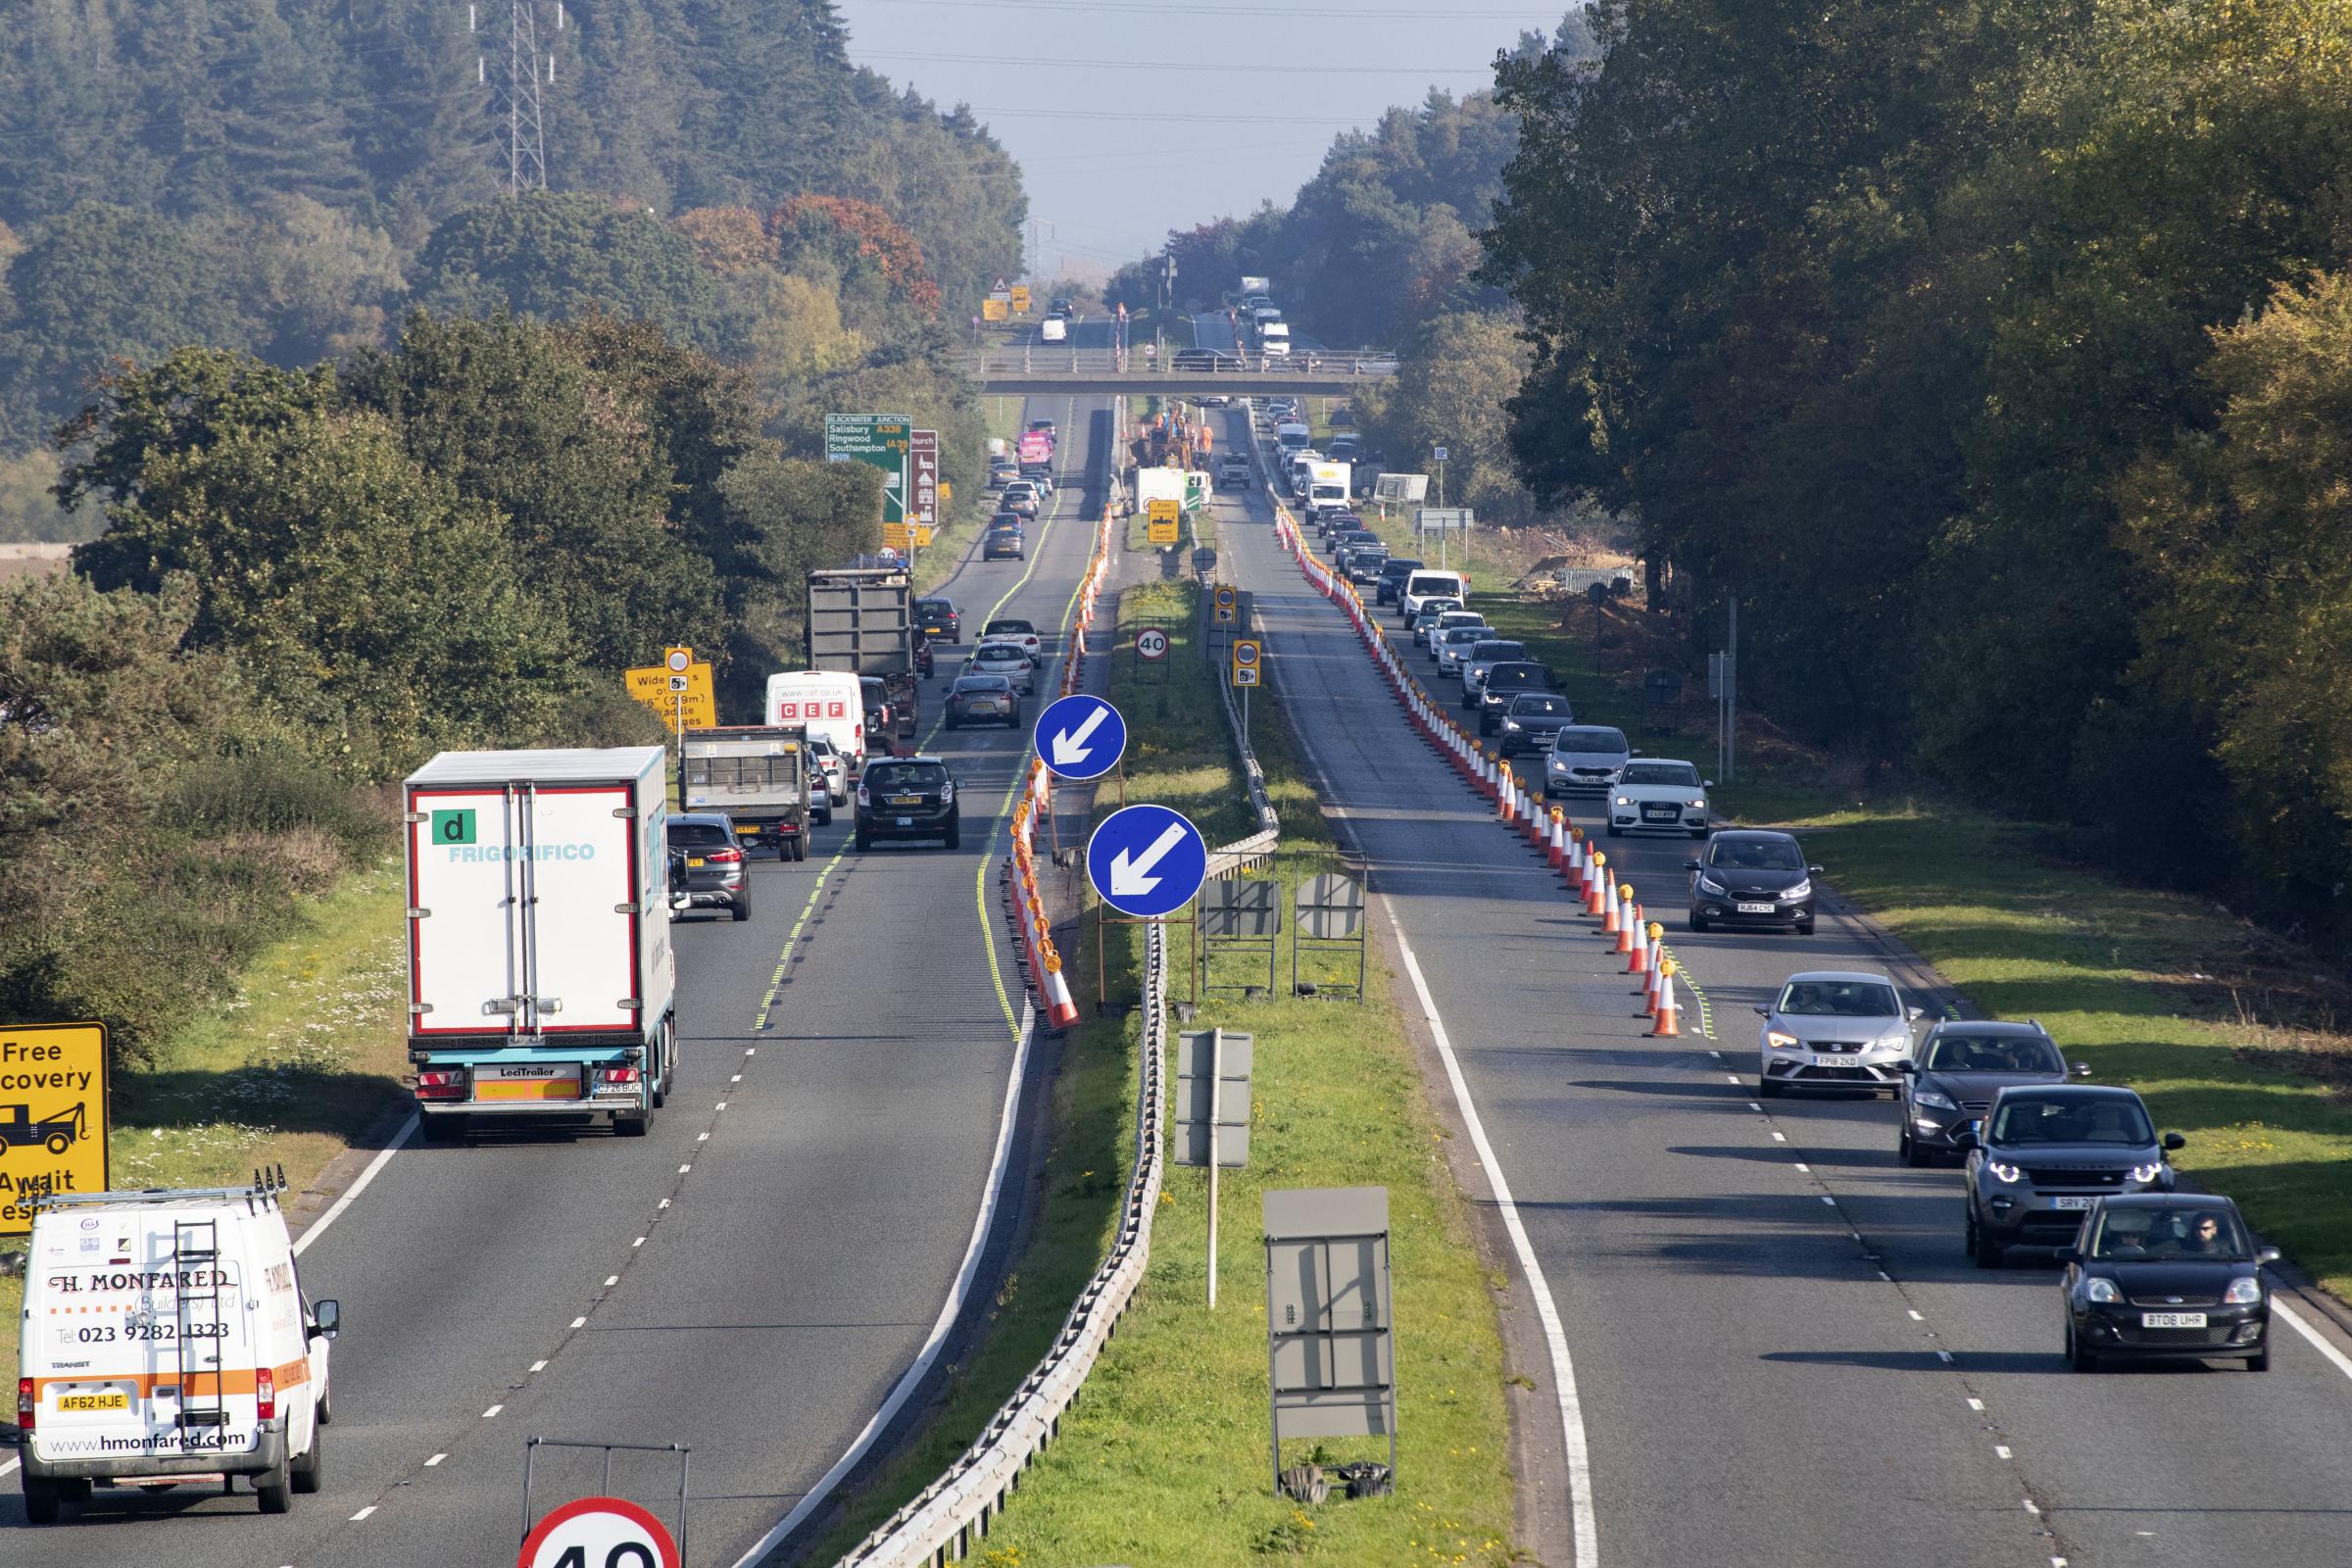 A338 roadworks to come to a halt for Christmas from Saturday (two days earlier than scheduled)